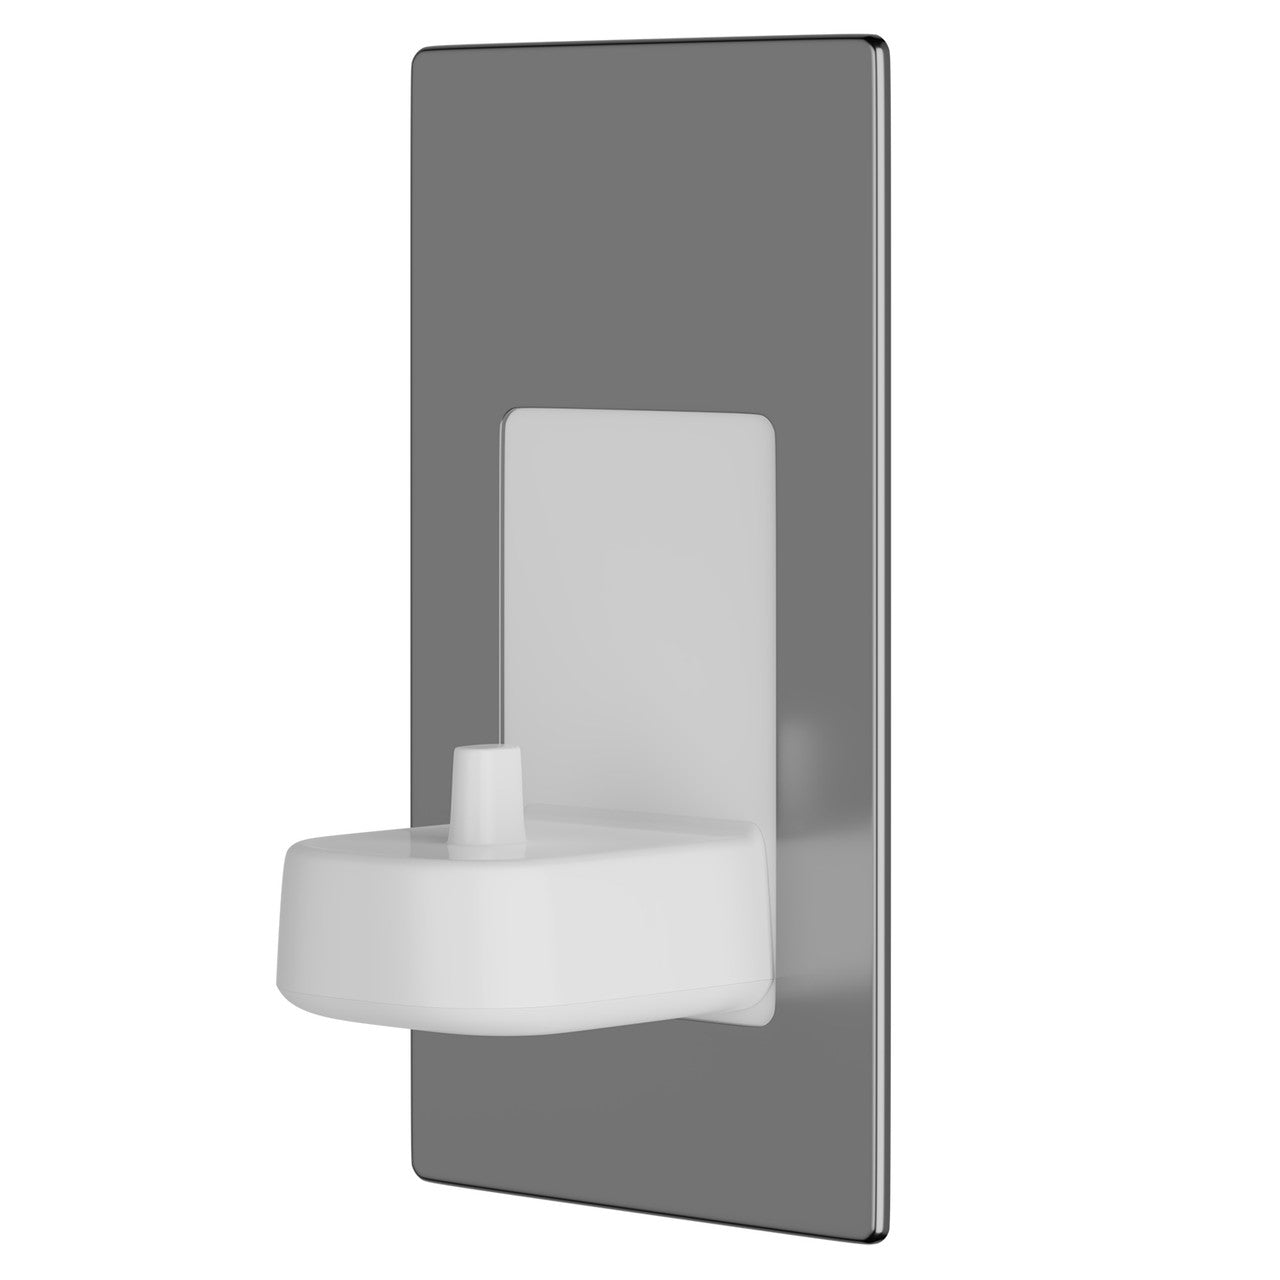 ProofVision PV10/PS-PLATE Electric Toothbrush Charger Polished Steel